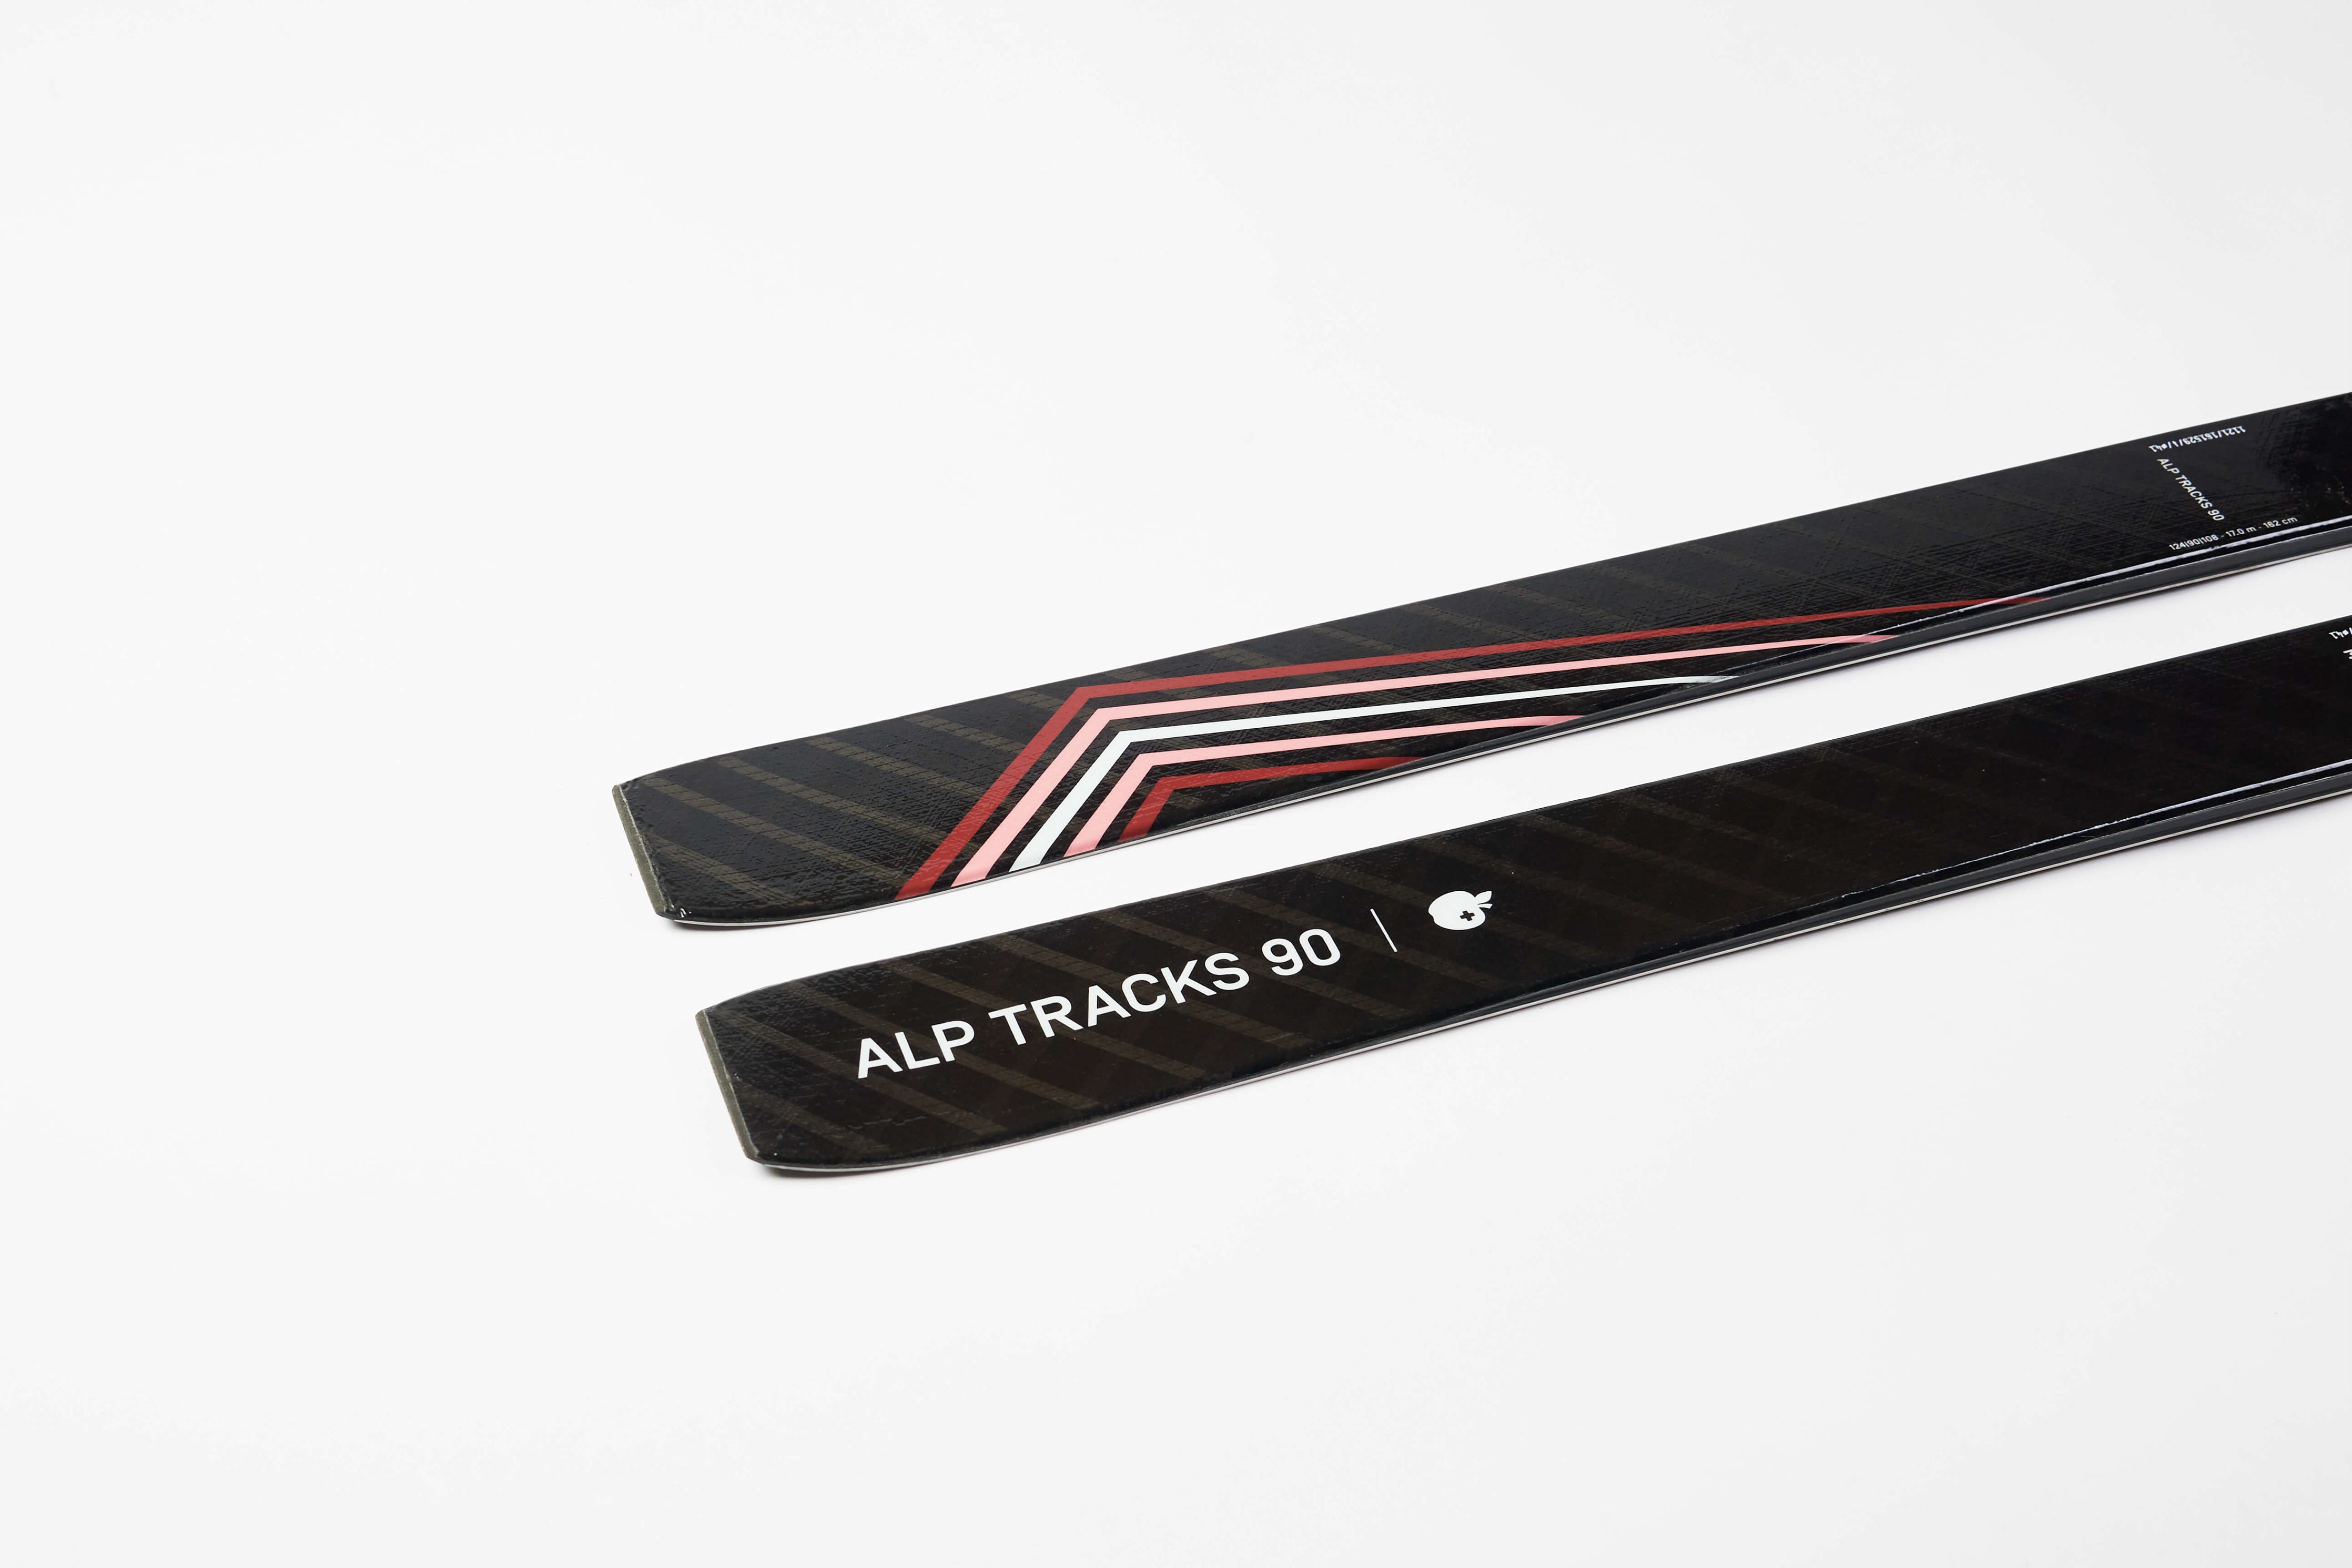 Elevate your touring adventures with Movement's Alp Tracks 90W skis.